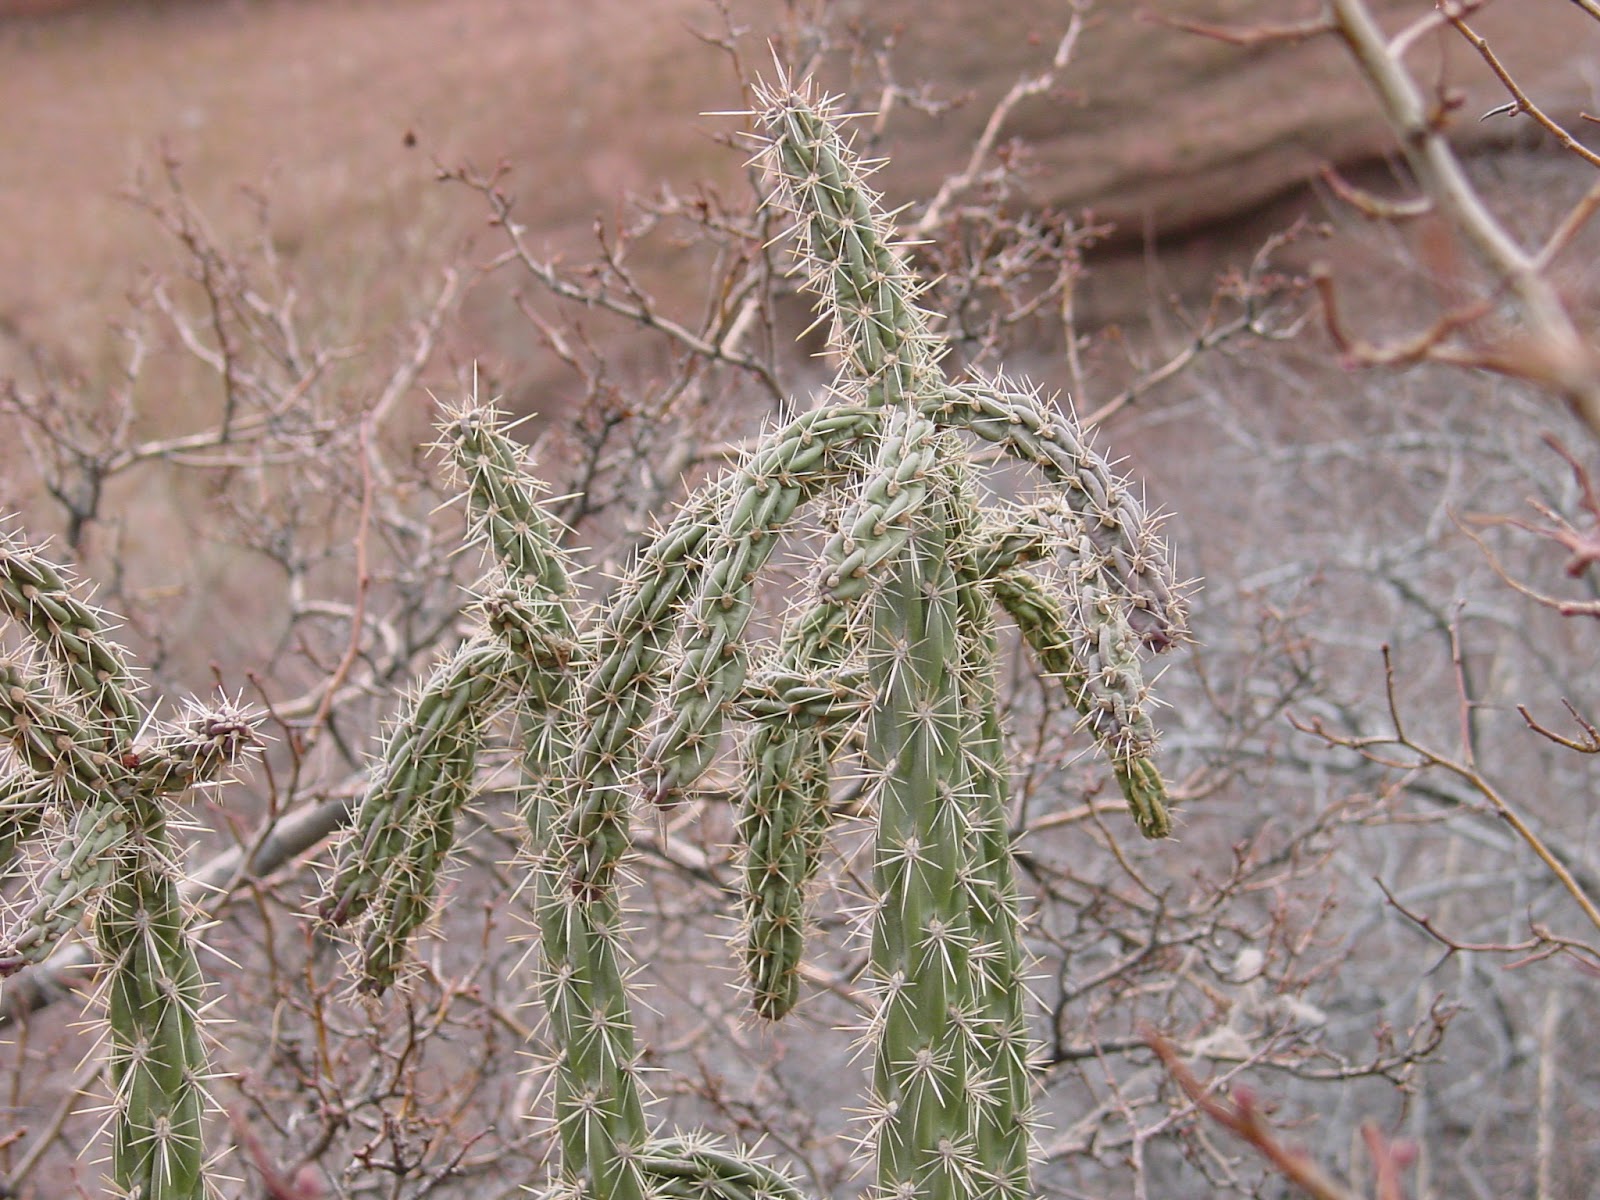 A thin cactus with prominent spikes.